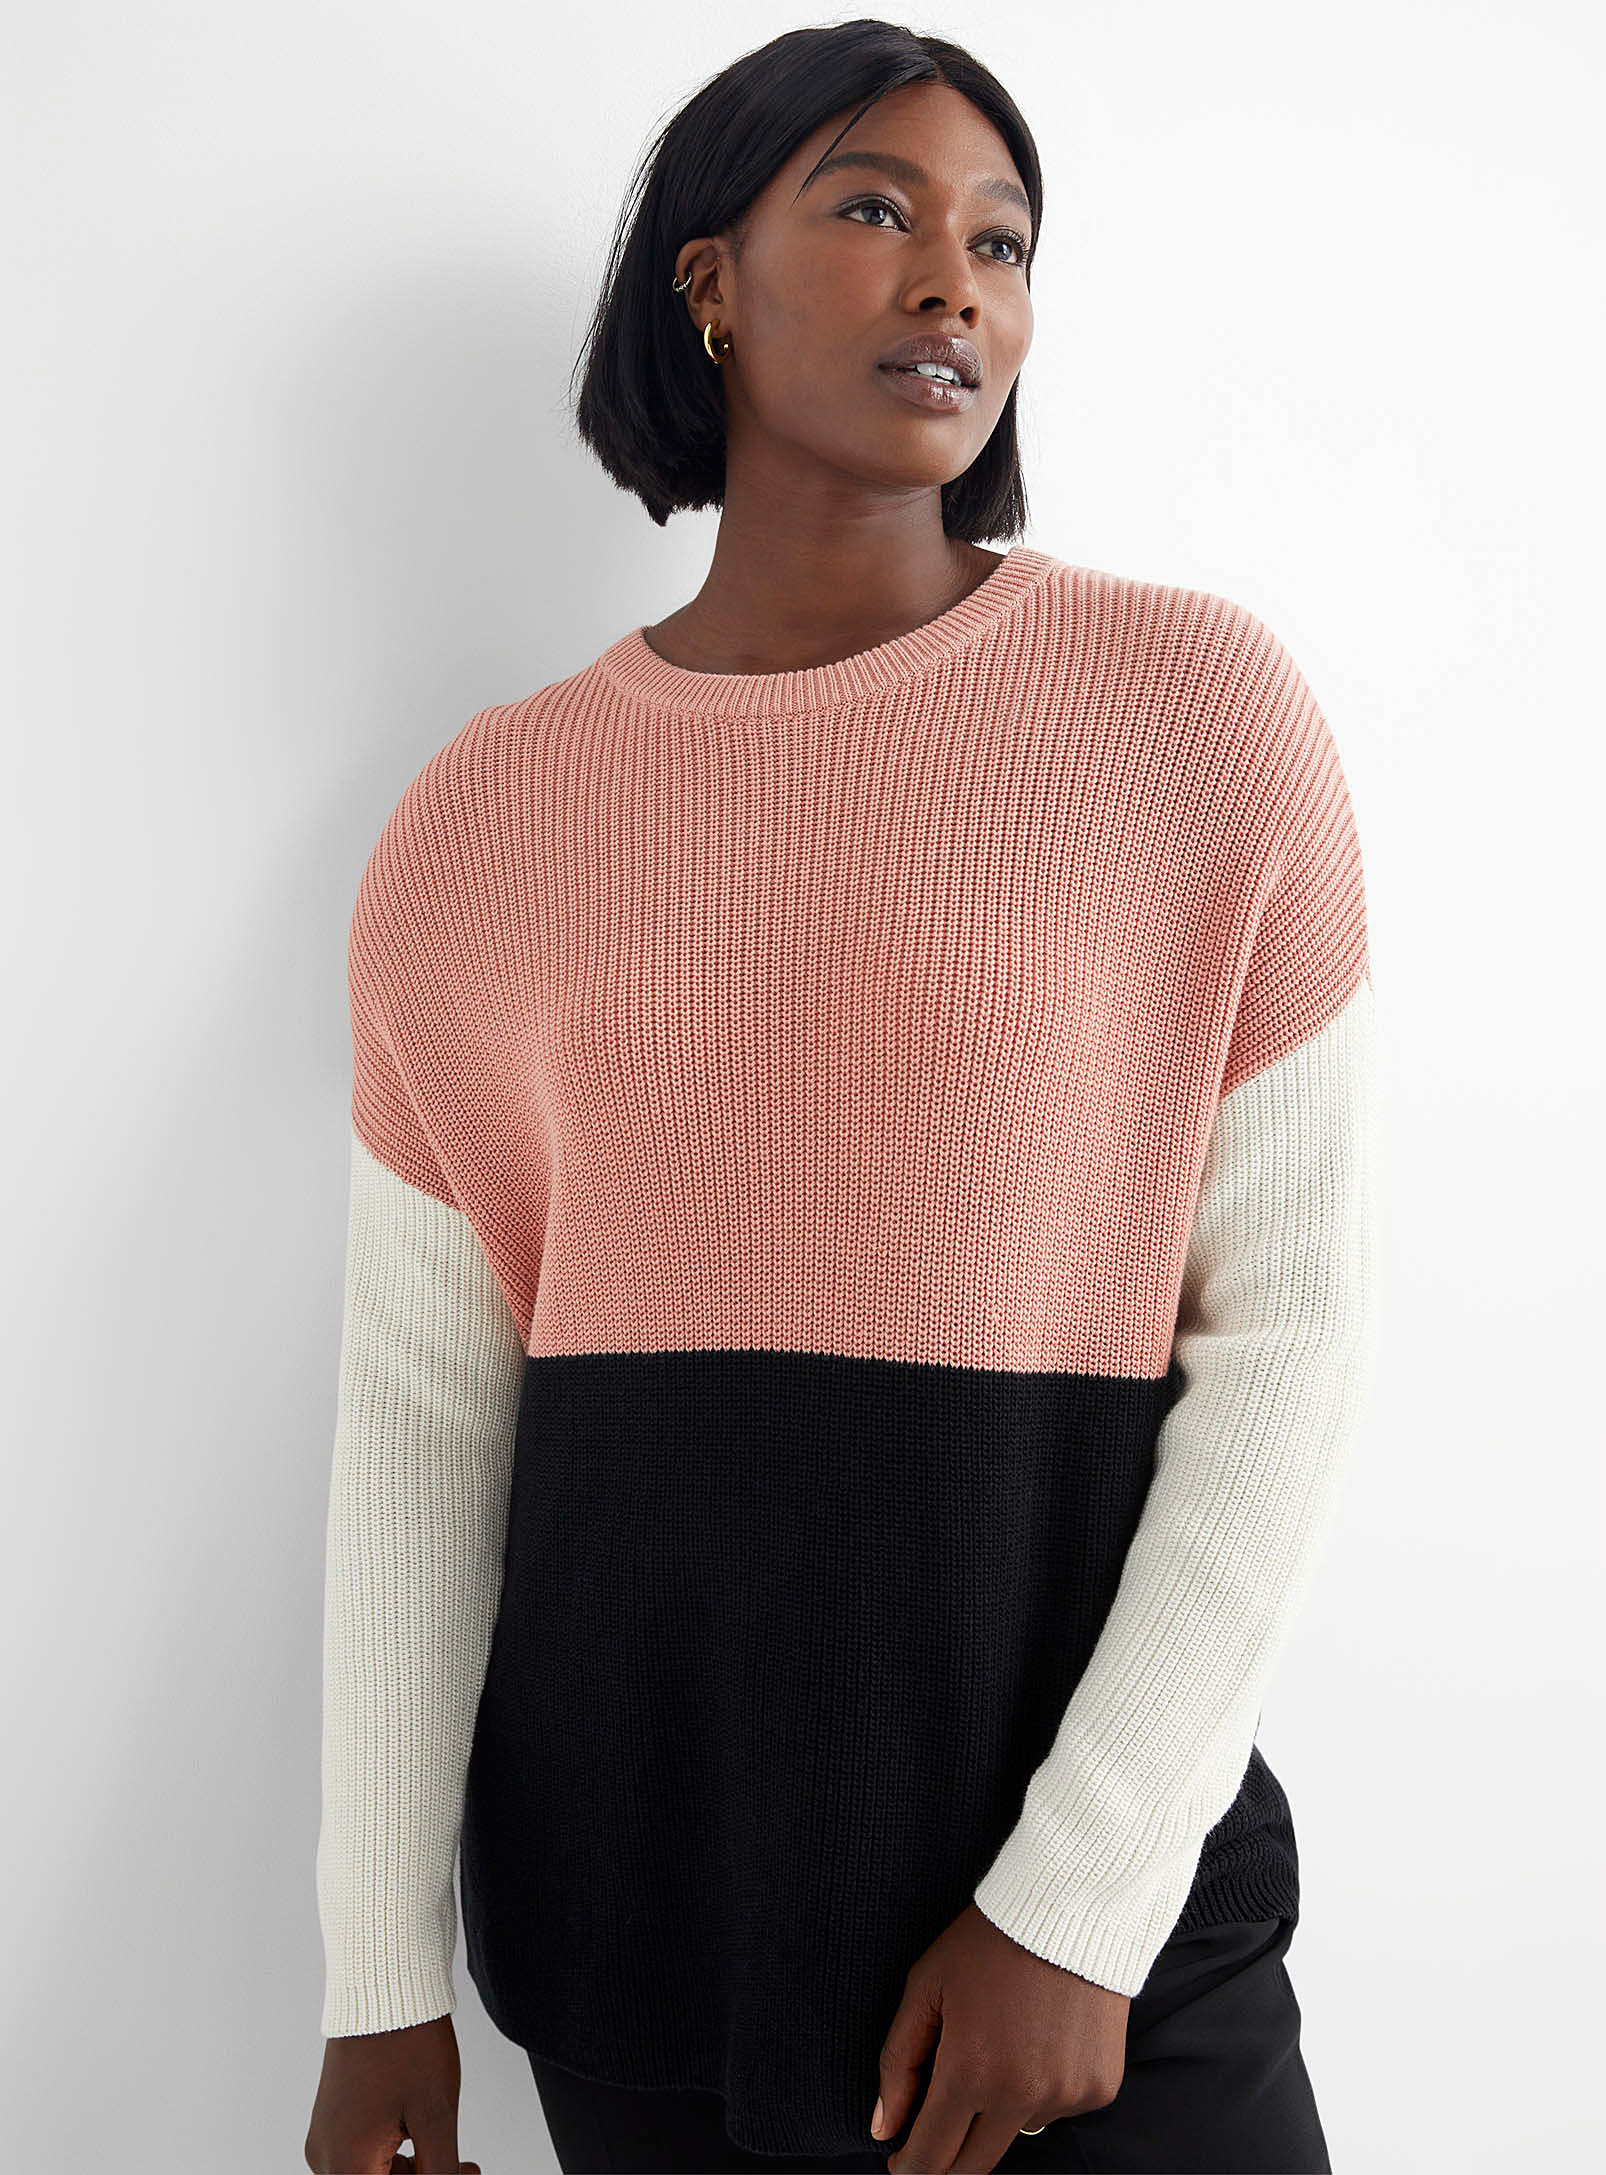 A person wear a loose knit sweater